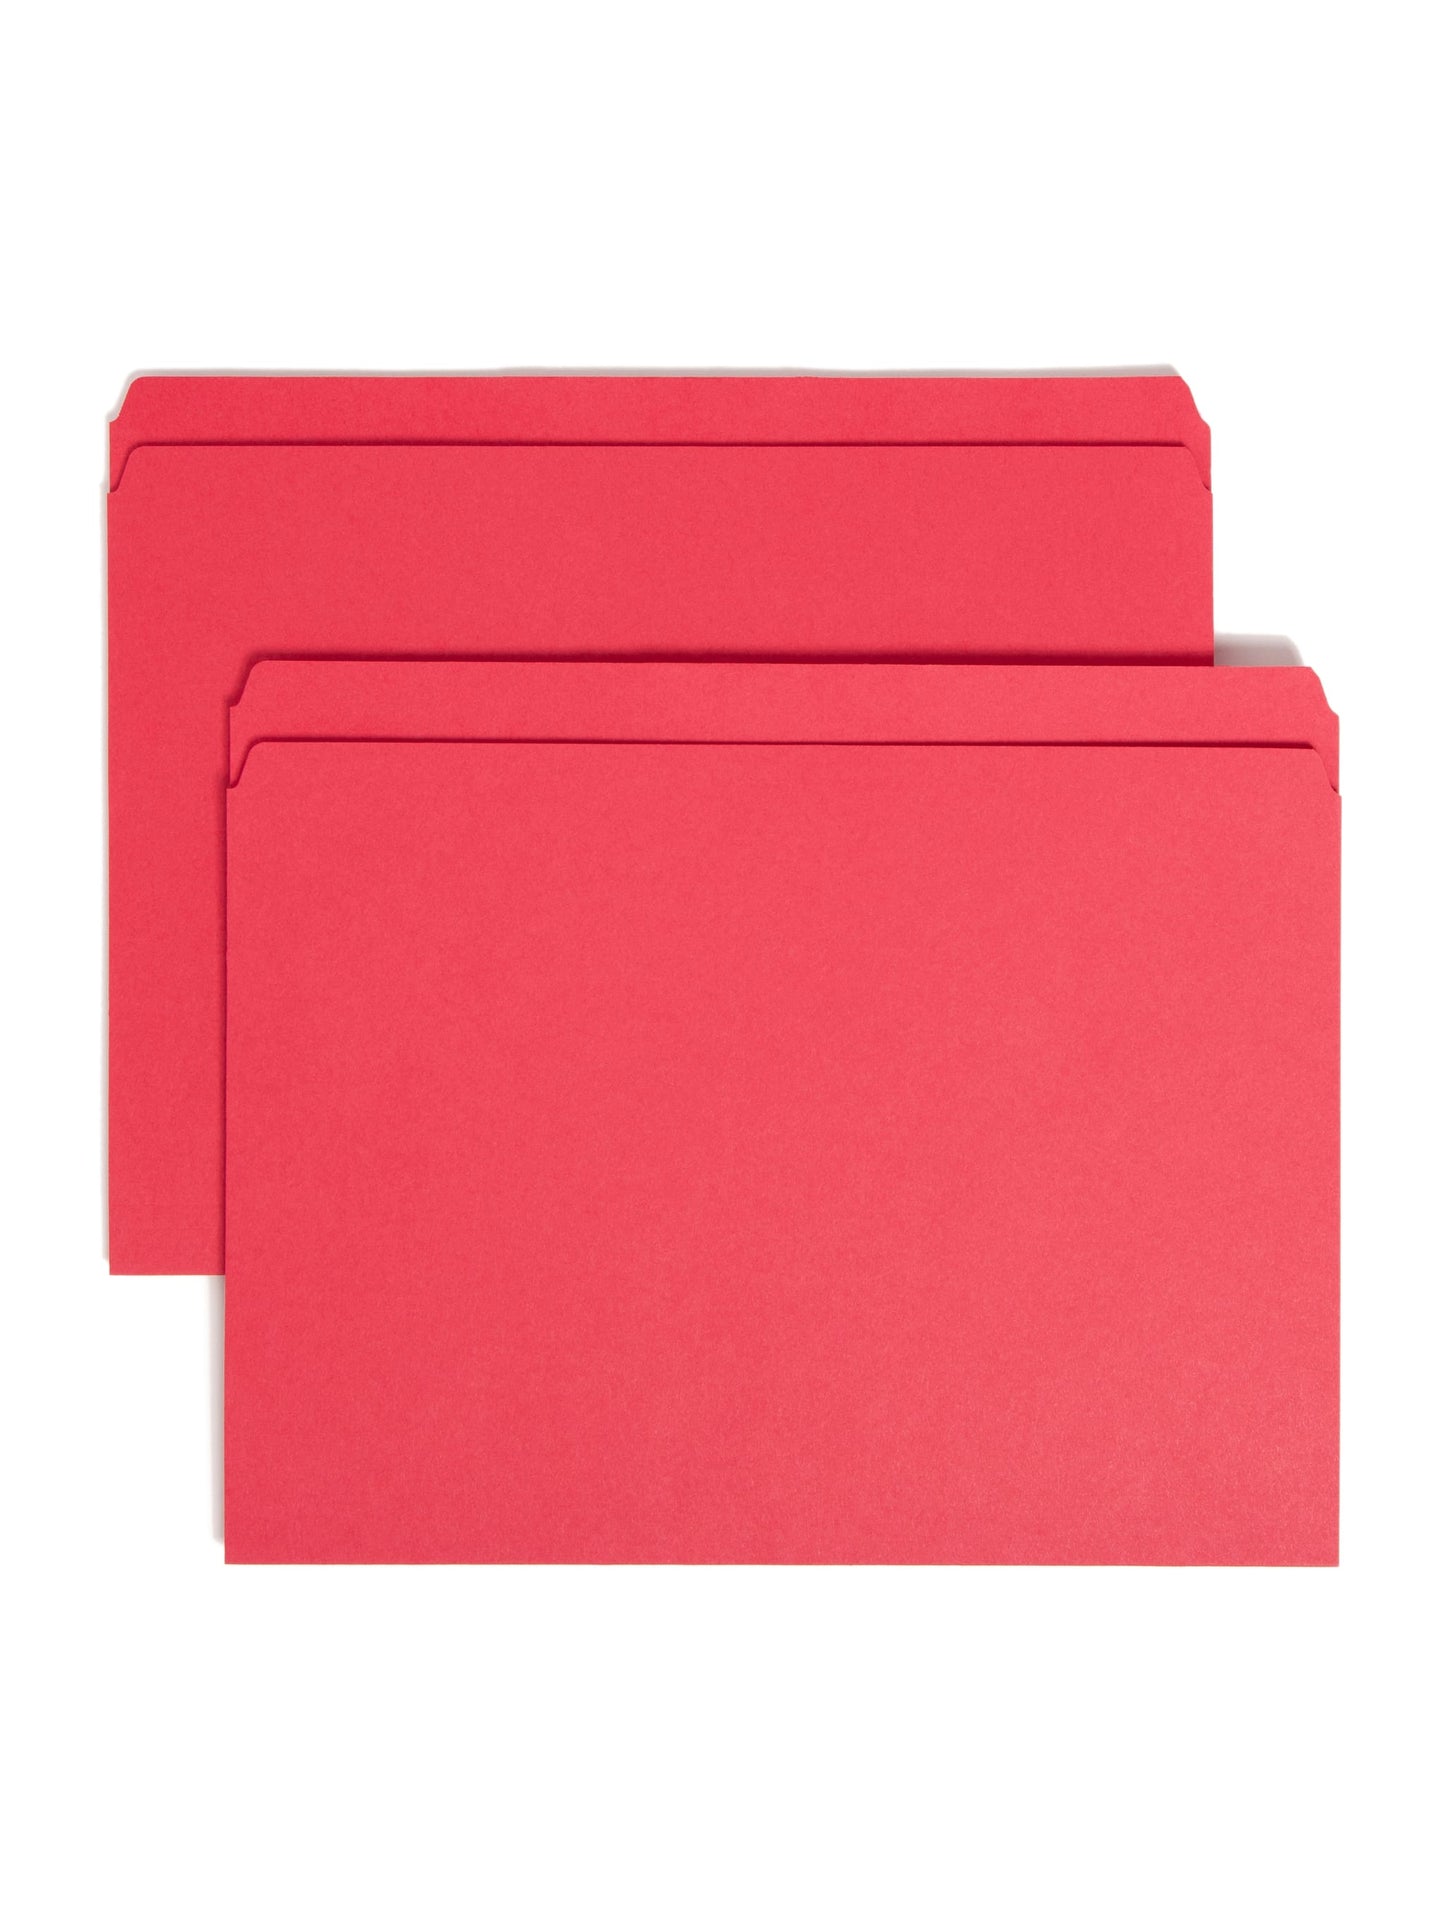 Standard File Folders, Straight-Cut Tab, Red Color, Letter Size, Set of 100, 086486109437